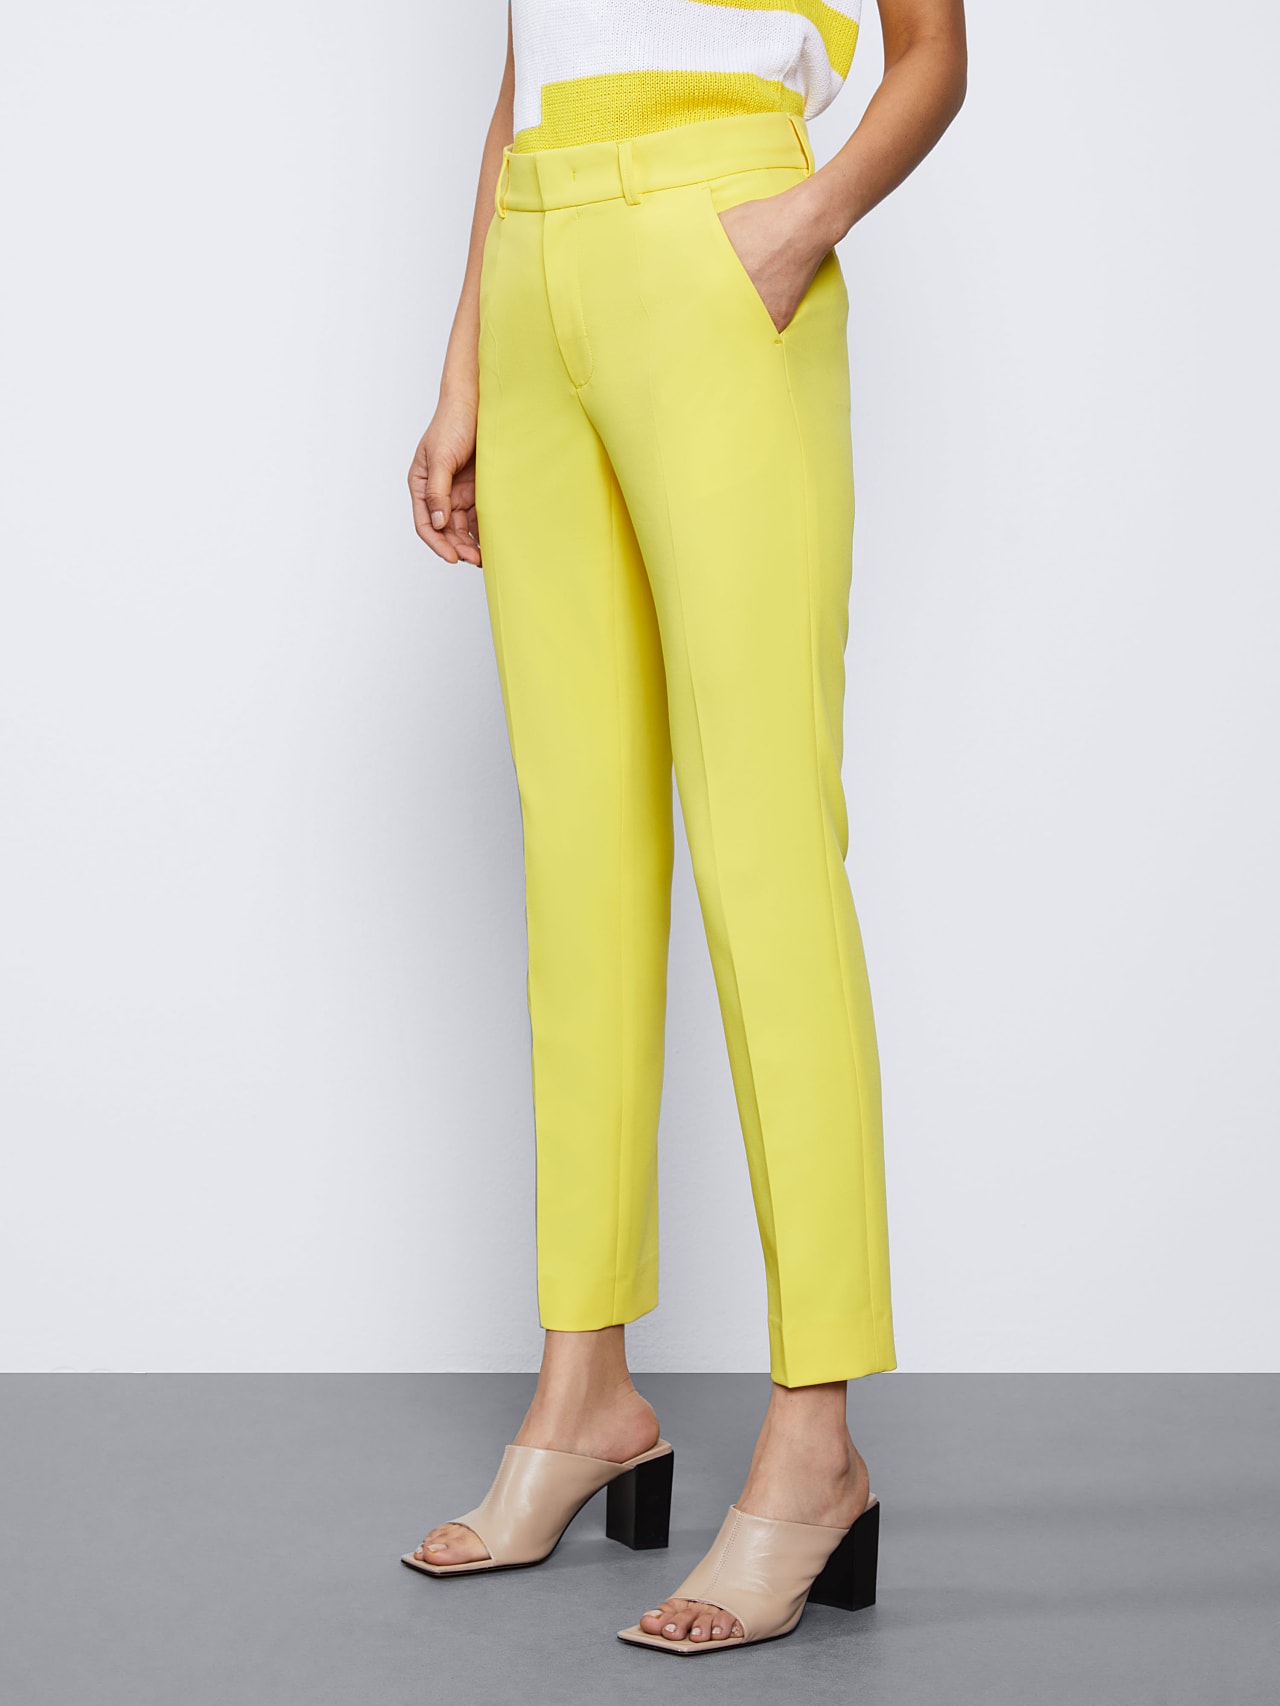 AlphaTauri | PERTI V2.Y6.01 | Water-repellent Tapered Pants in yellow for Women